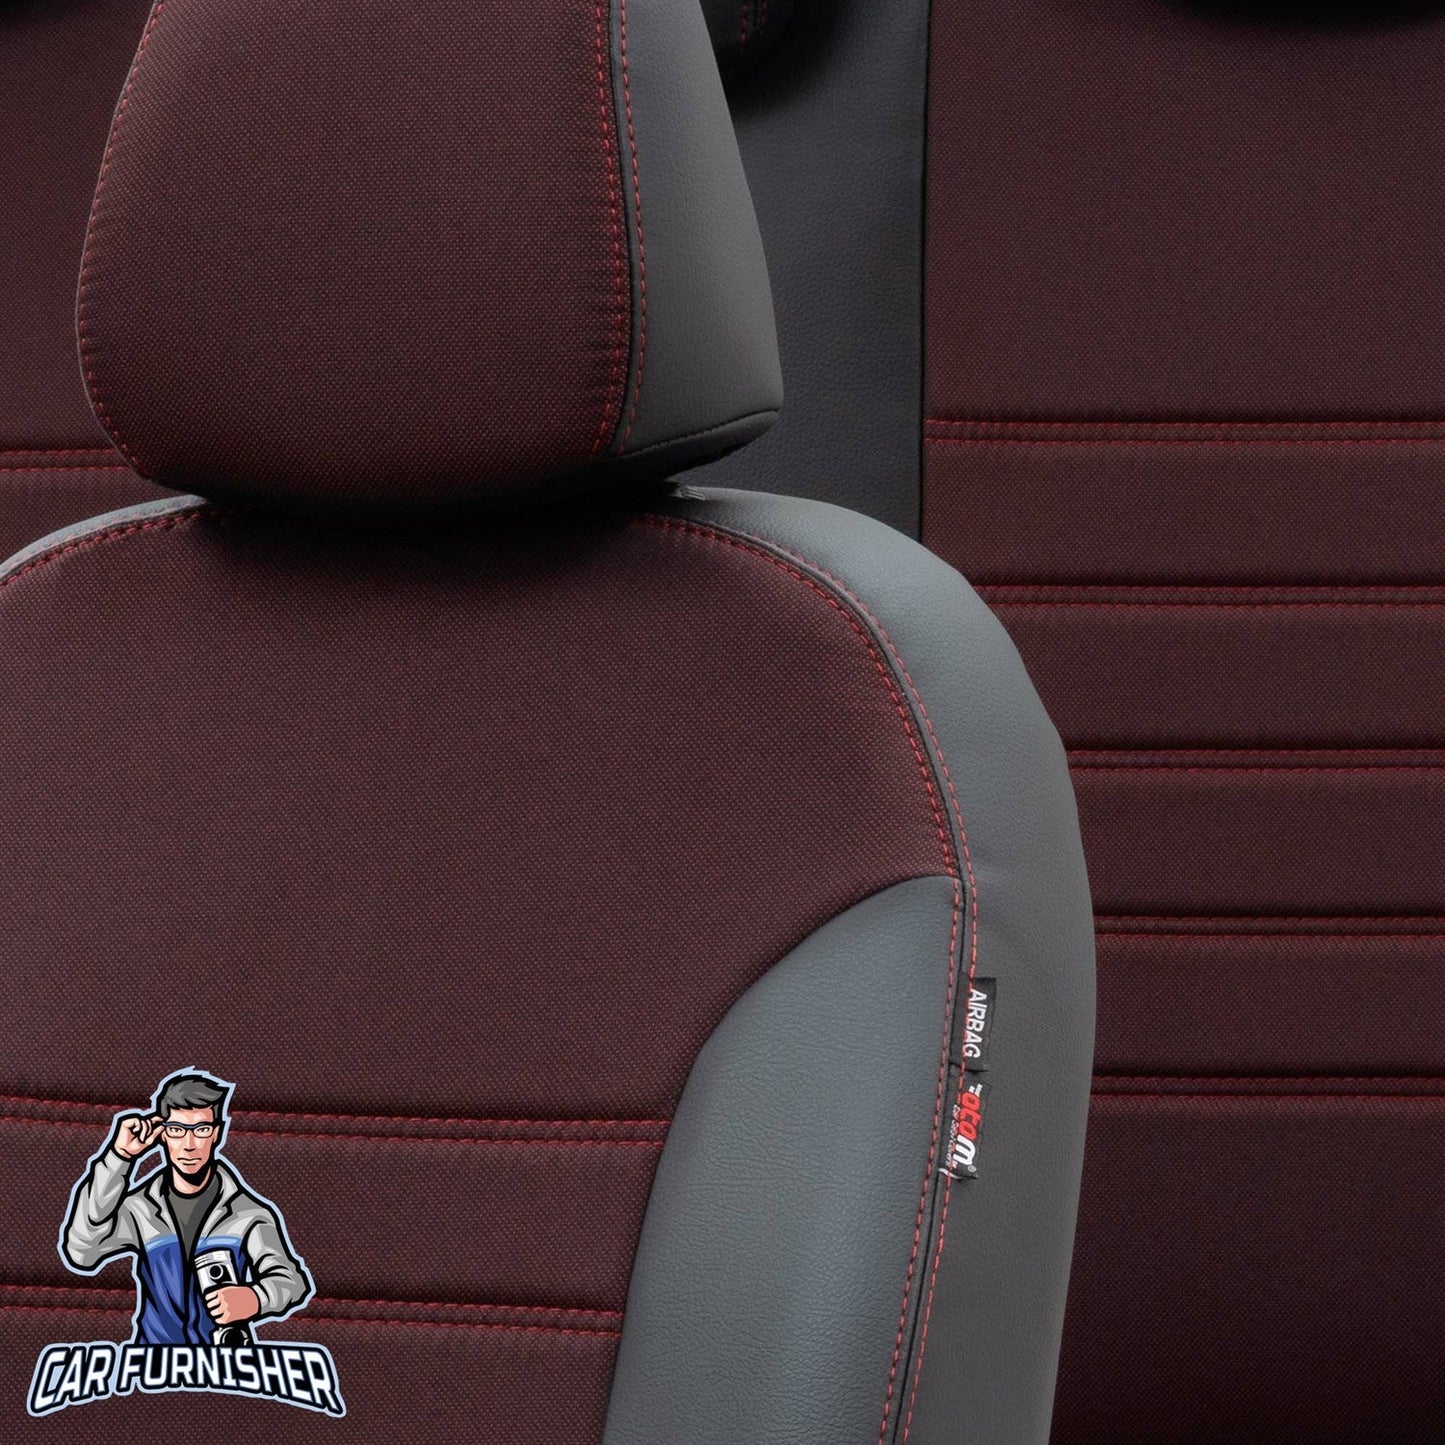 Volkswagen Golf Seat Cover Paris Leather & Jacquard Design Red Leather & Jacquard Fabric